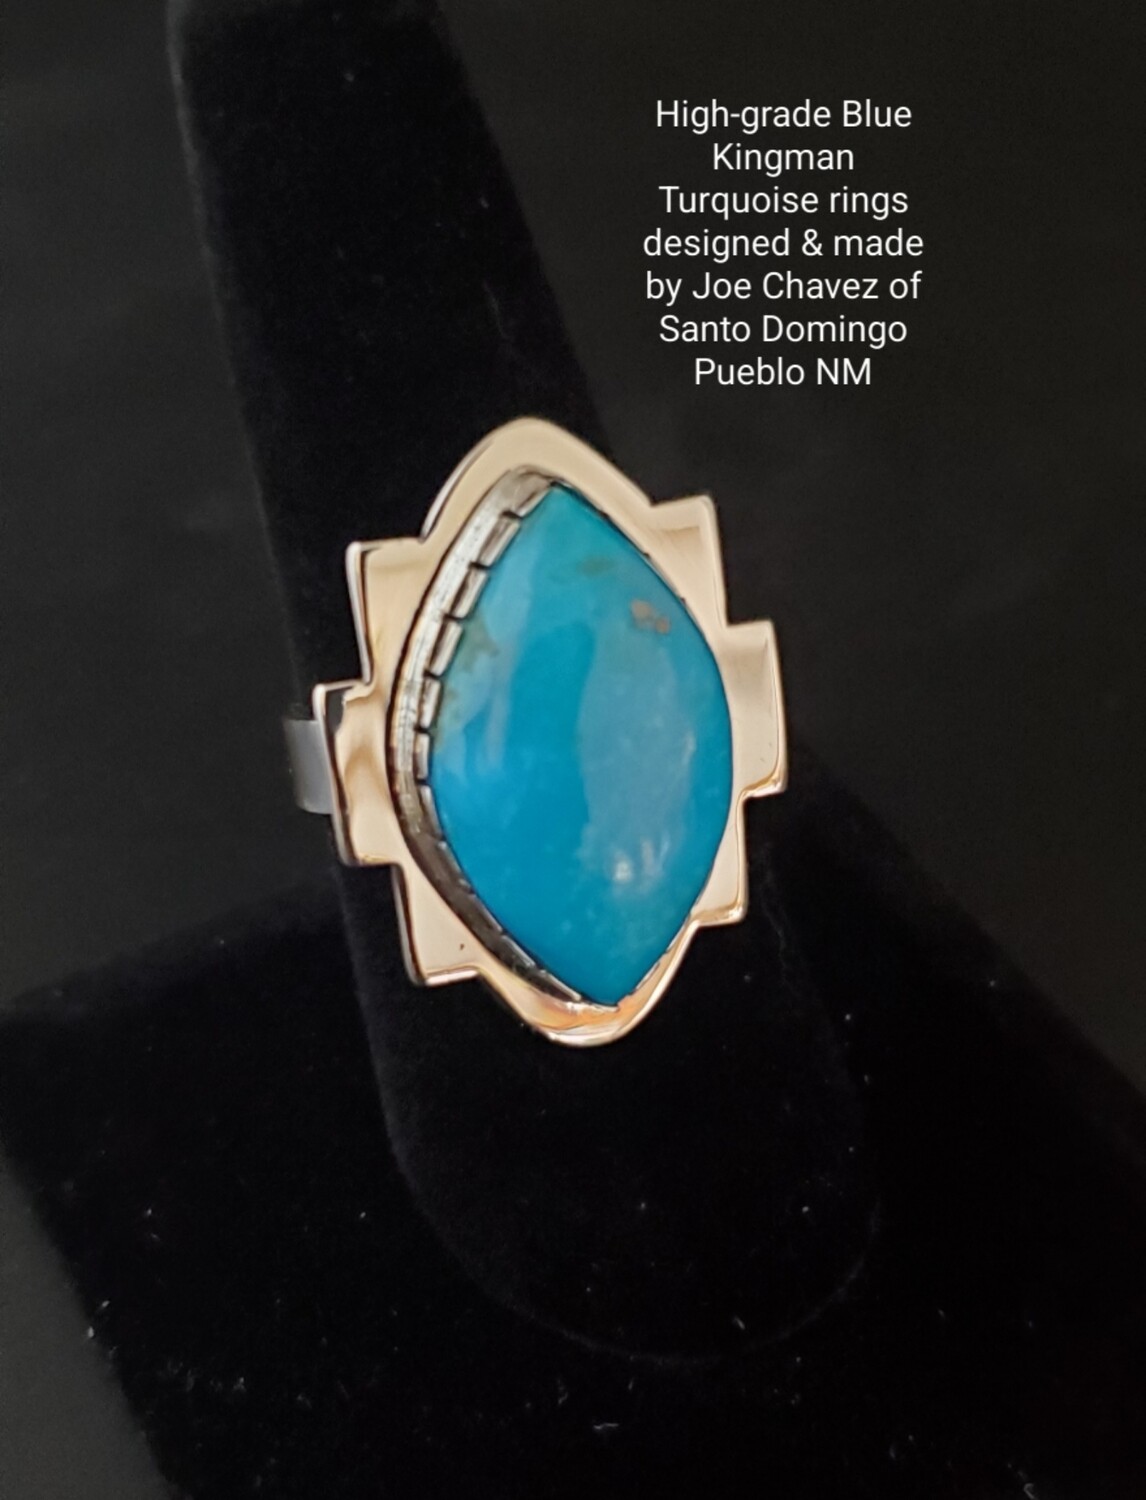 Sterling silver adjustable ring with High-grade Blue Kingman Turquoise